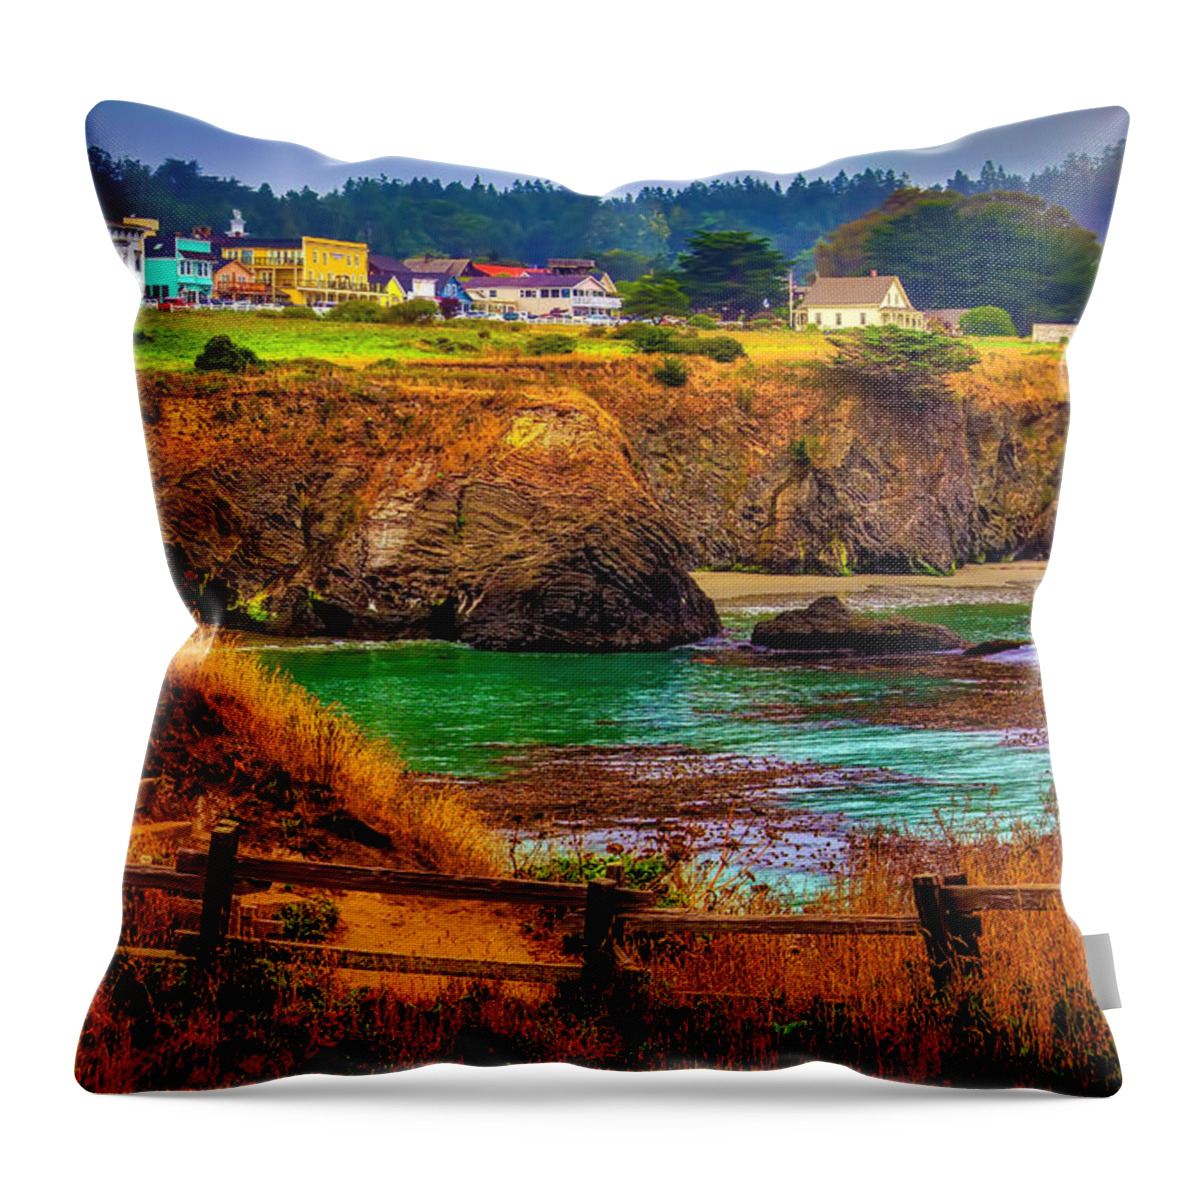 Mendocino Throw Pillow featuring the photograph Lovely Mendocino by Garry Gay